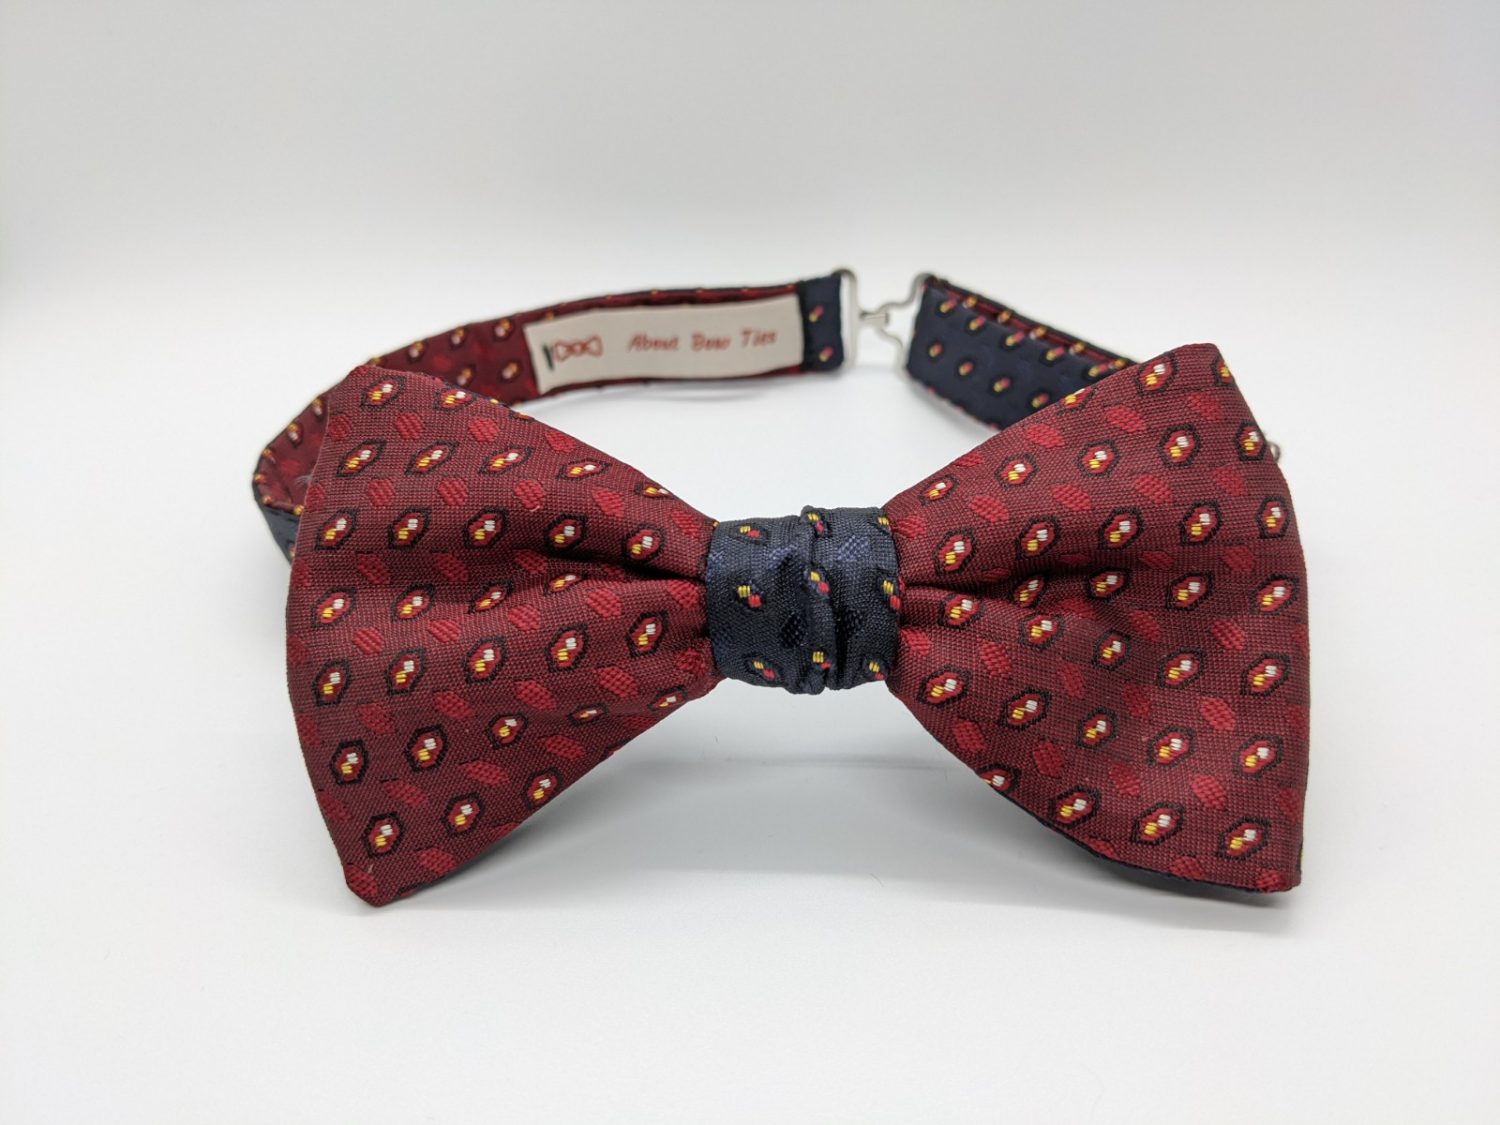 Maroon Reversible Bow Tie - About Bow Ties